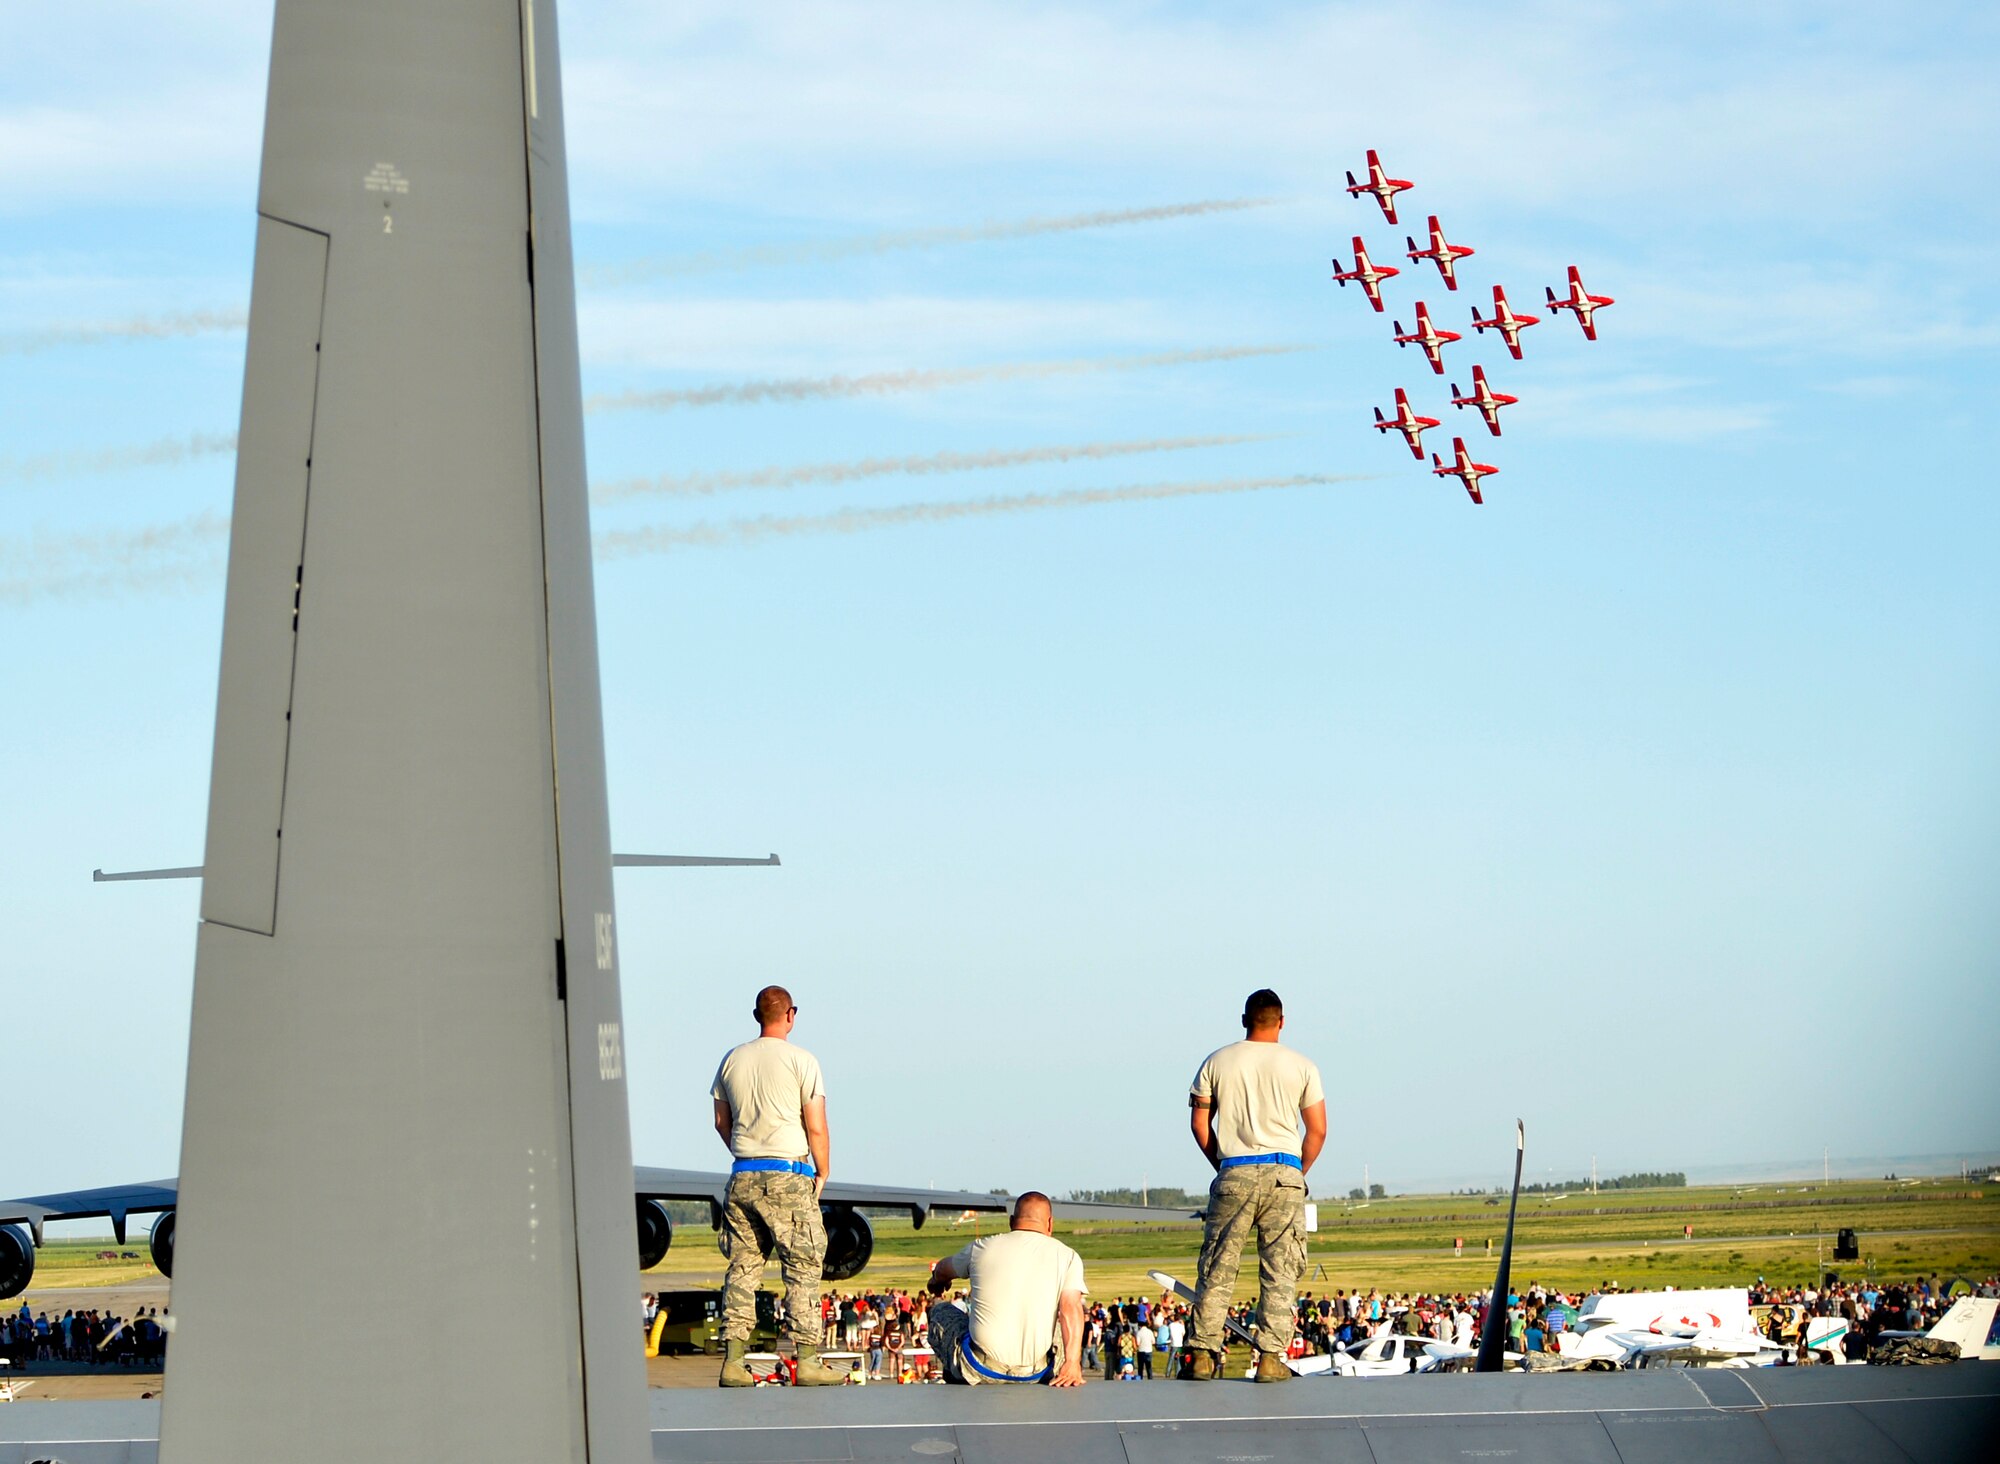 Airmen from the 415th Special Operations Squadron stand on top of a C-130 Hercules to watch the Royal Canadian Forces Snowbirds perform July 24, 2015, in Lethbridge, Alberta province, Canada. The C-130 static display and Snowbird performance were part of the 2015 Lethbridge International Air Show. (U.S. Air Force photo/Airman 1st Class Christian Clausen)